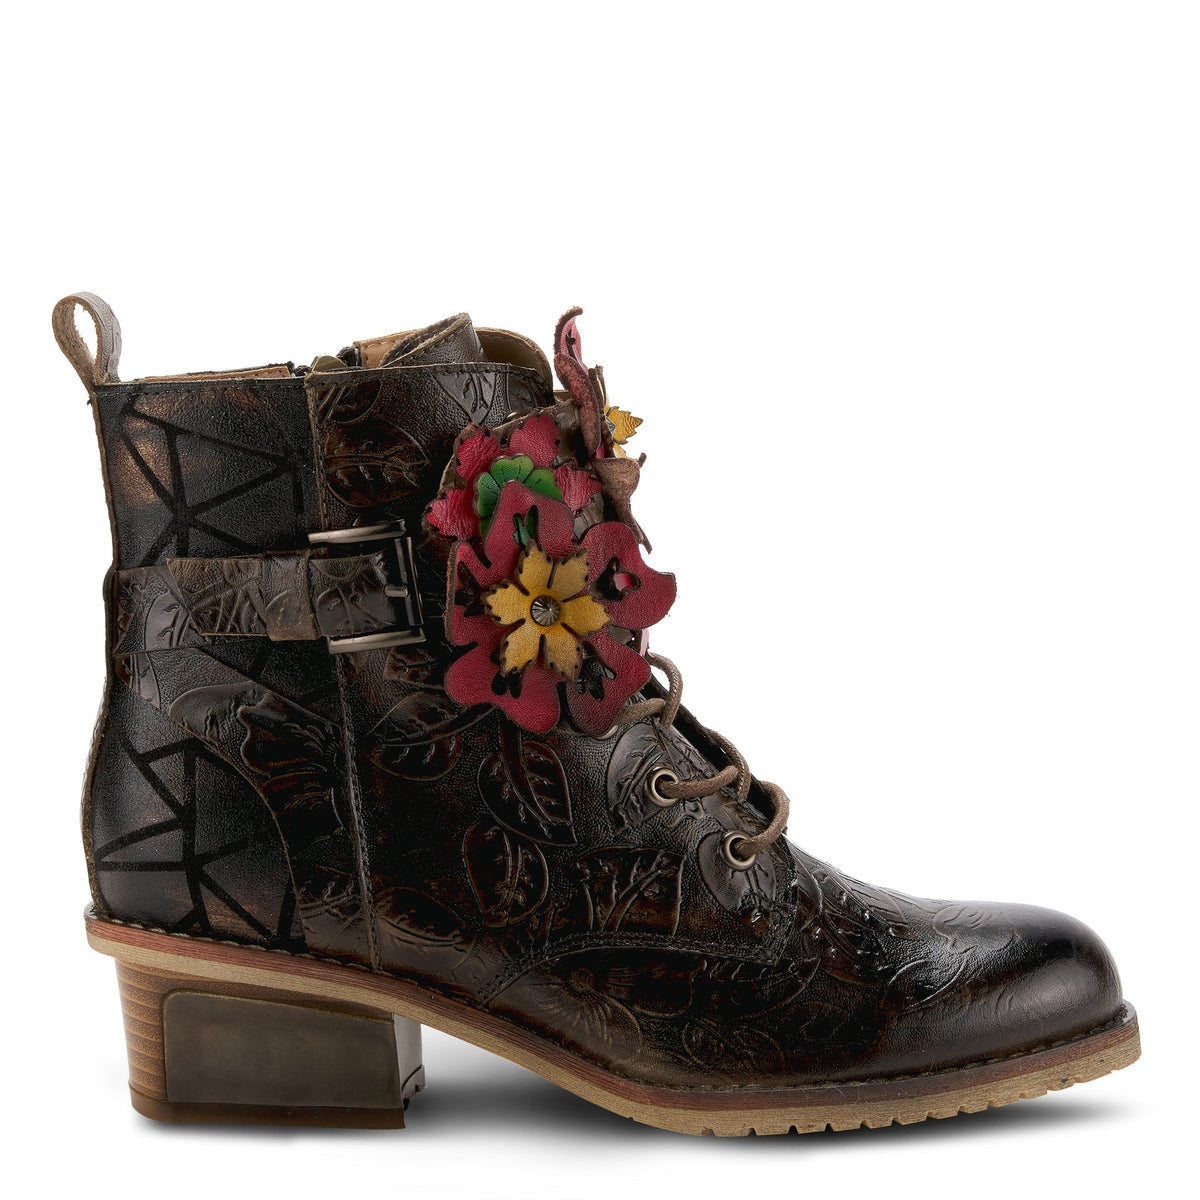 Dark brown L'Artiste Brand Groovie Booties with floral leather details and side zipper